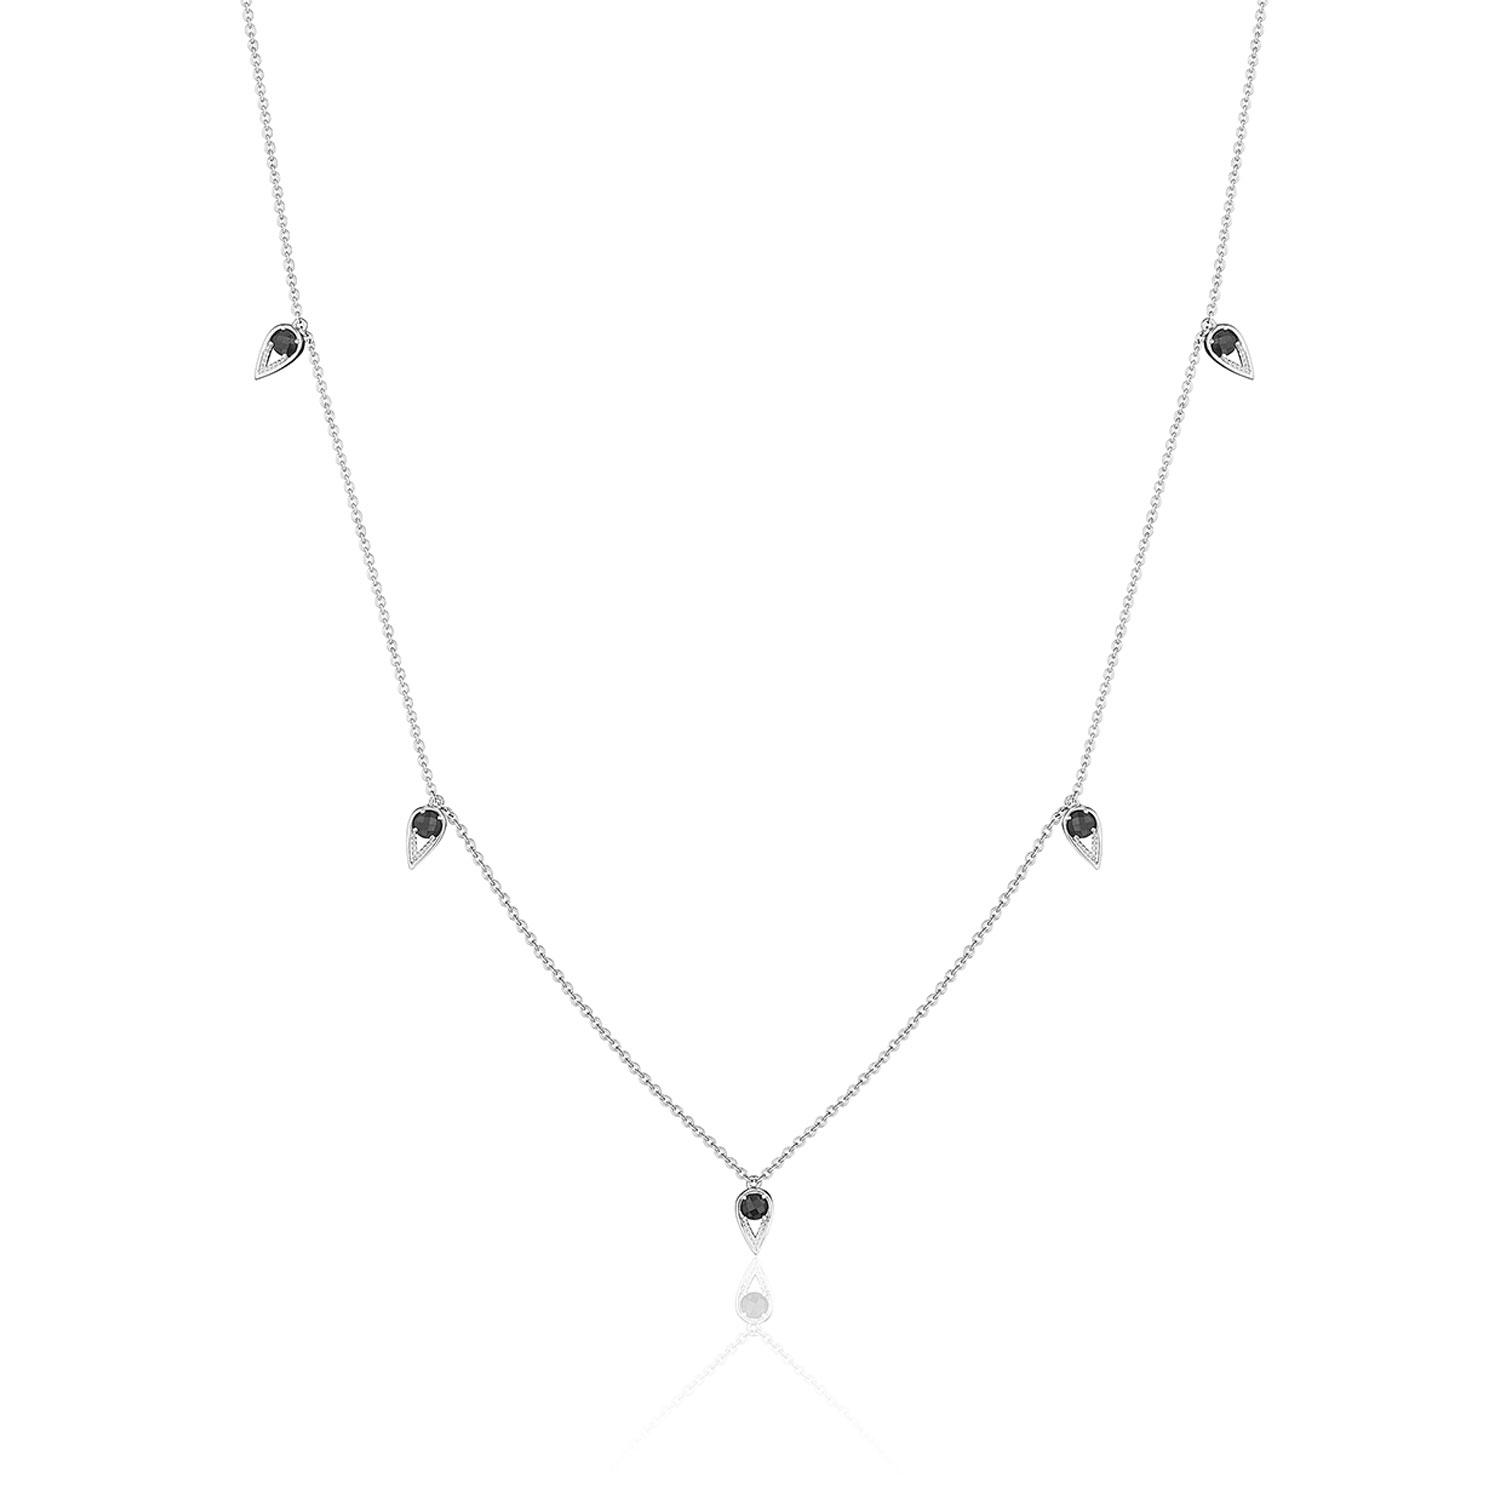 Tacori SN24419 5-Station Open Crescent Gemstone Necklace with Black Onyx